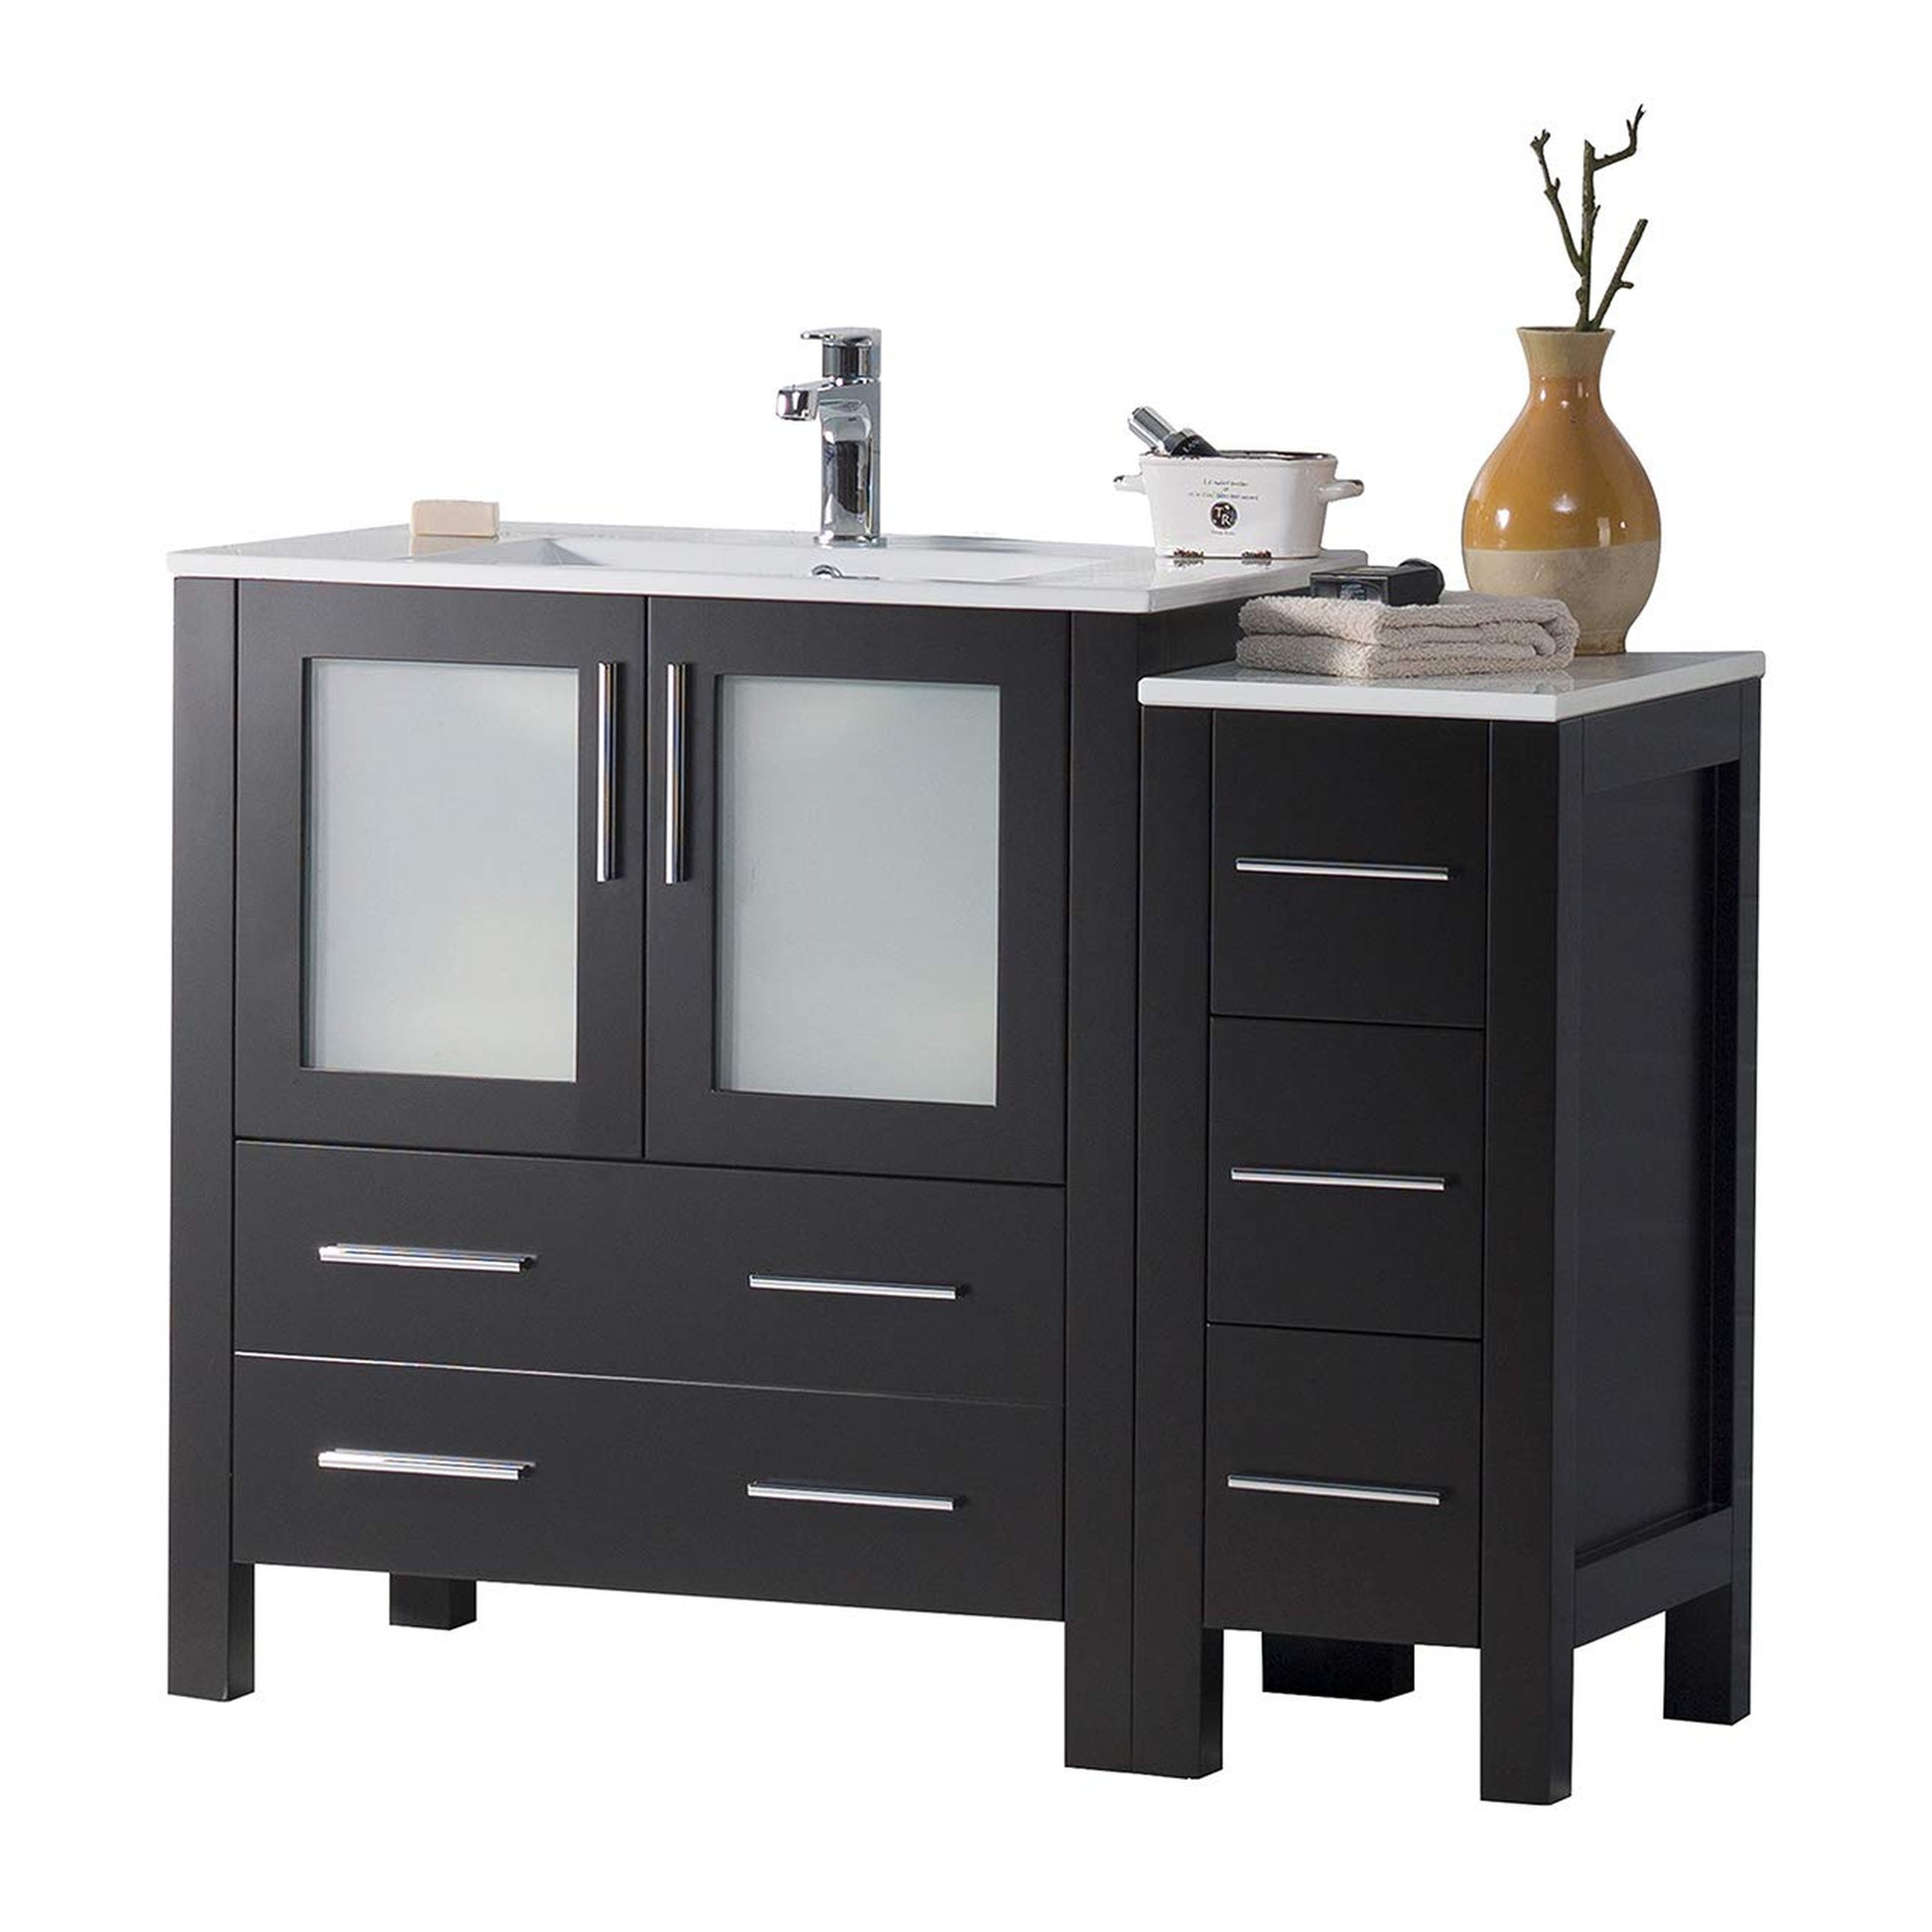 Blossom Sydney 42" Espresso Freestanding Vanity Set With Integrated Single Sink Ceramic Top and Side Cabinet